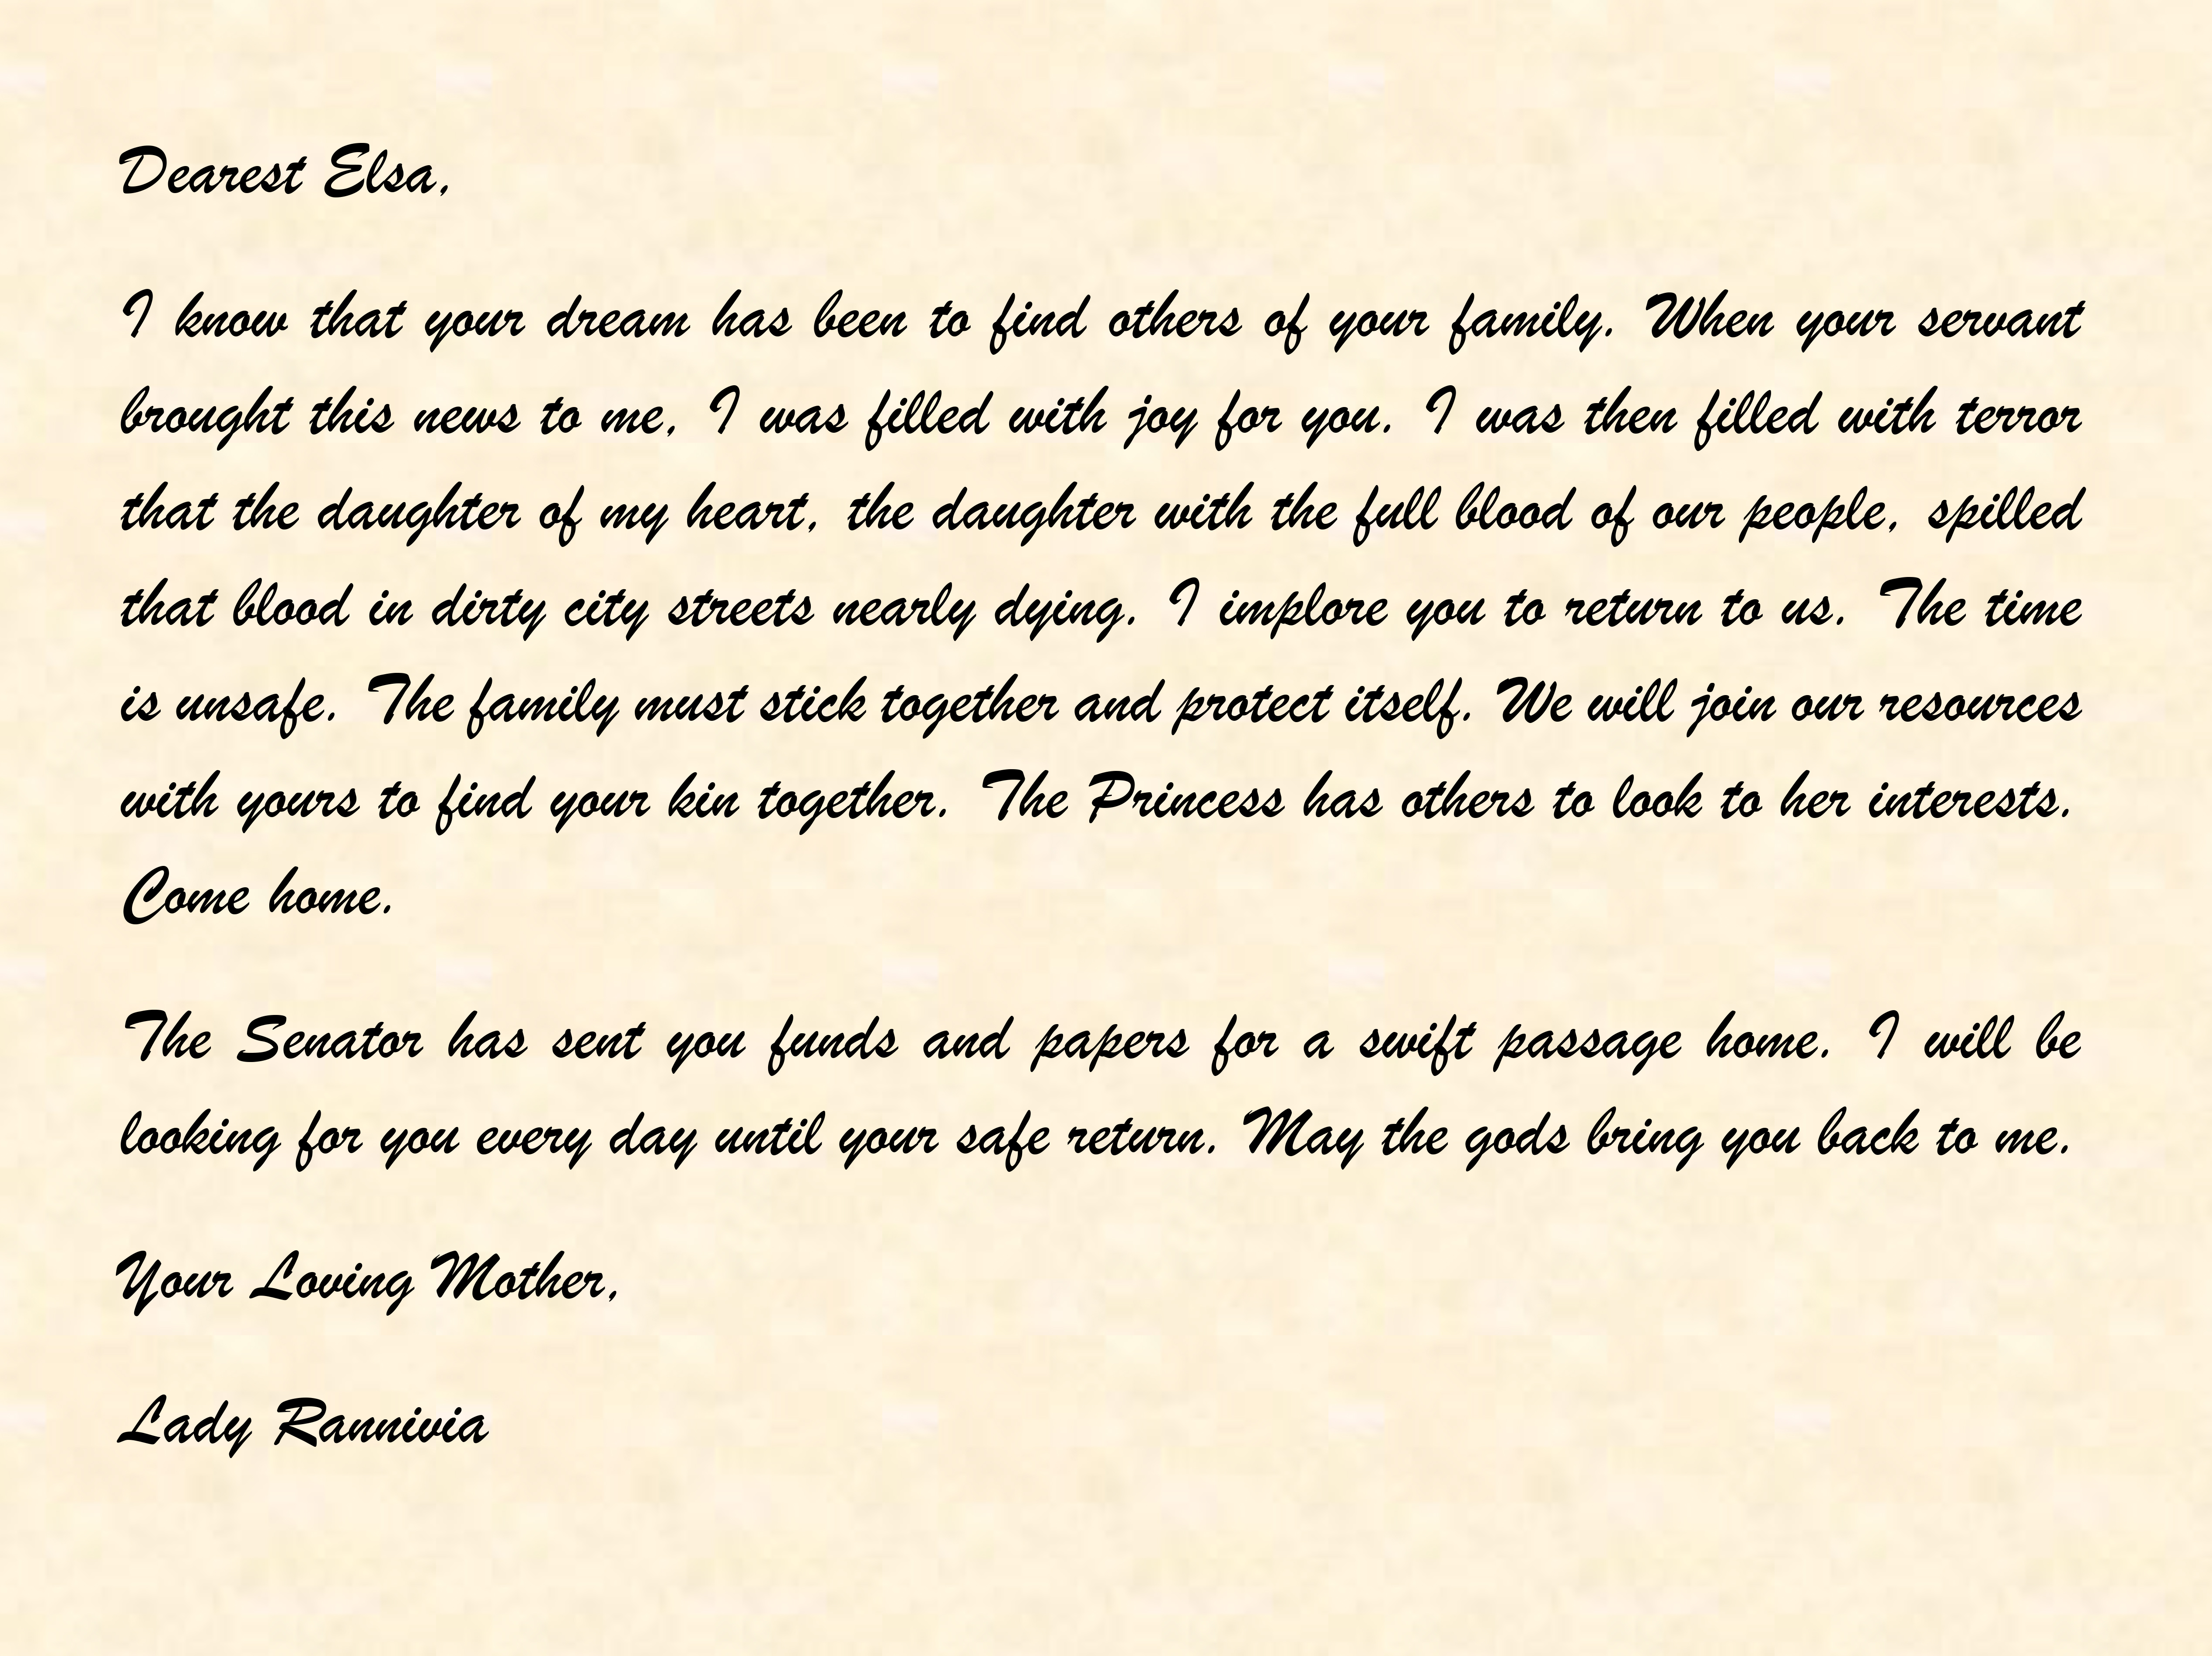 Letter from Lady Ravinnia